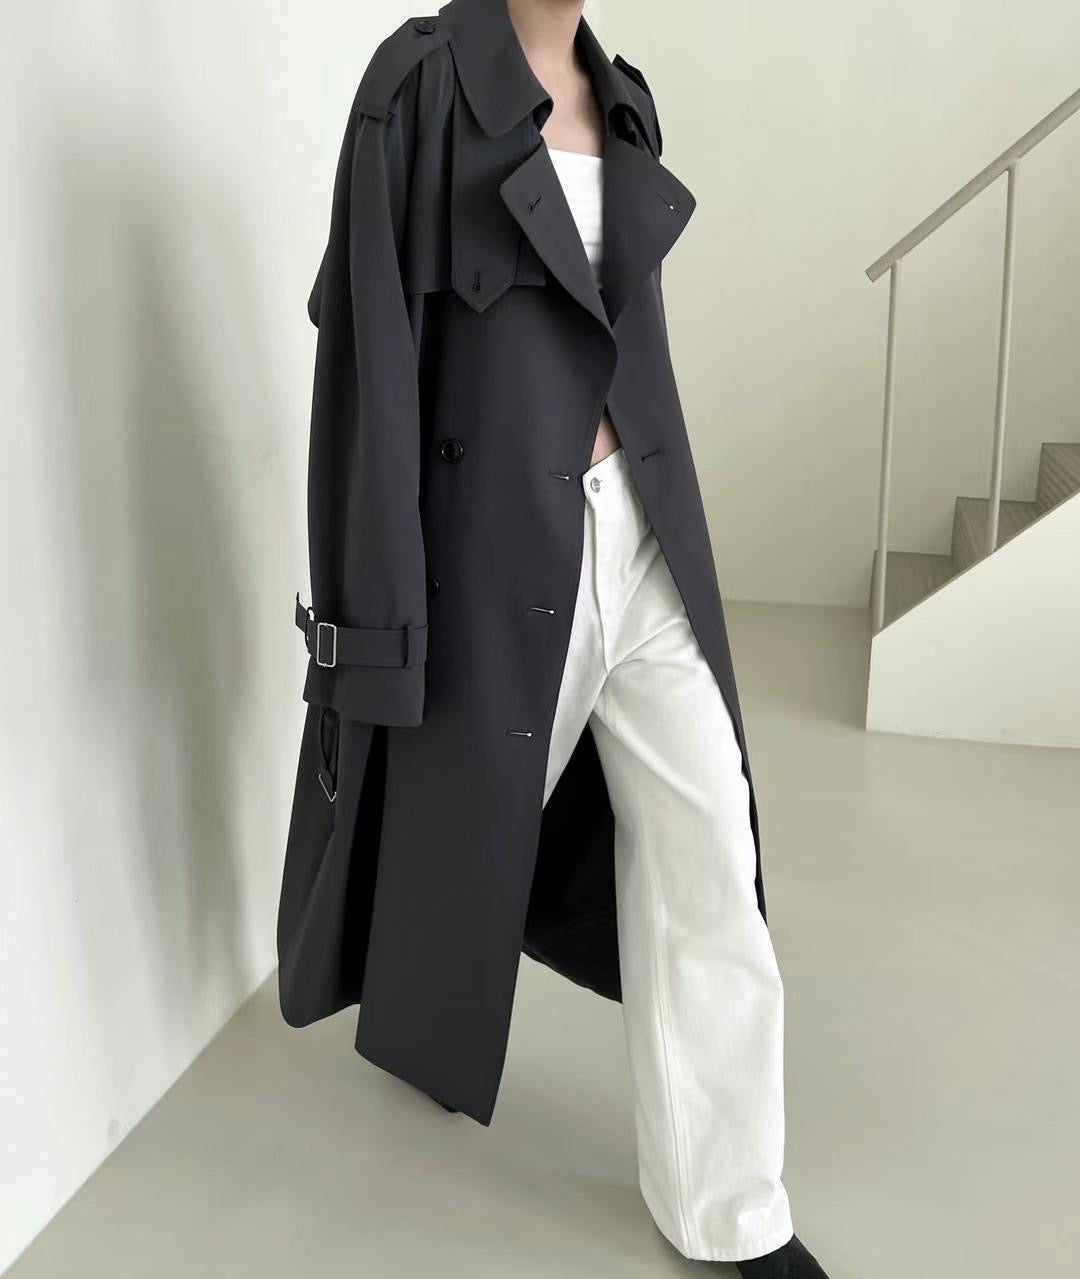 Charcoal Carrie Trench Coat